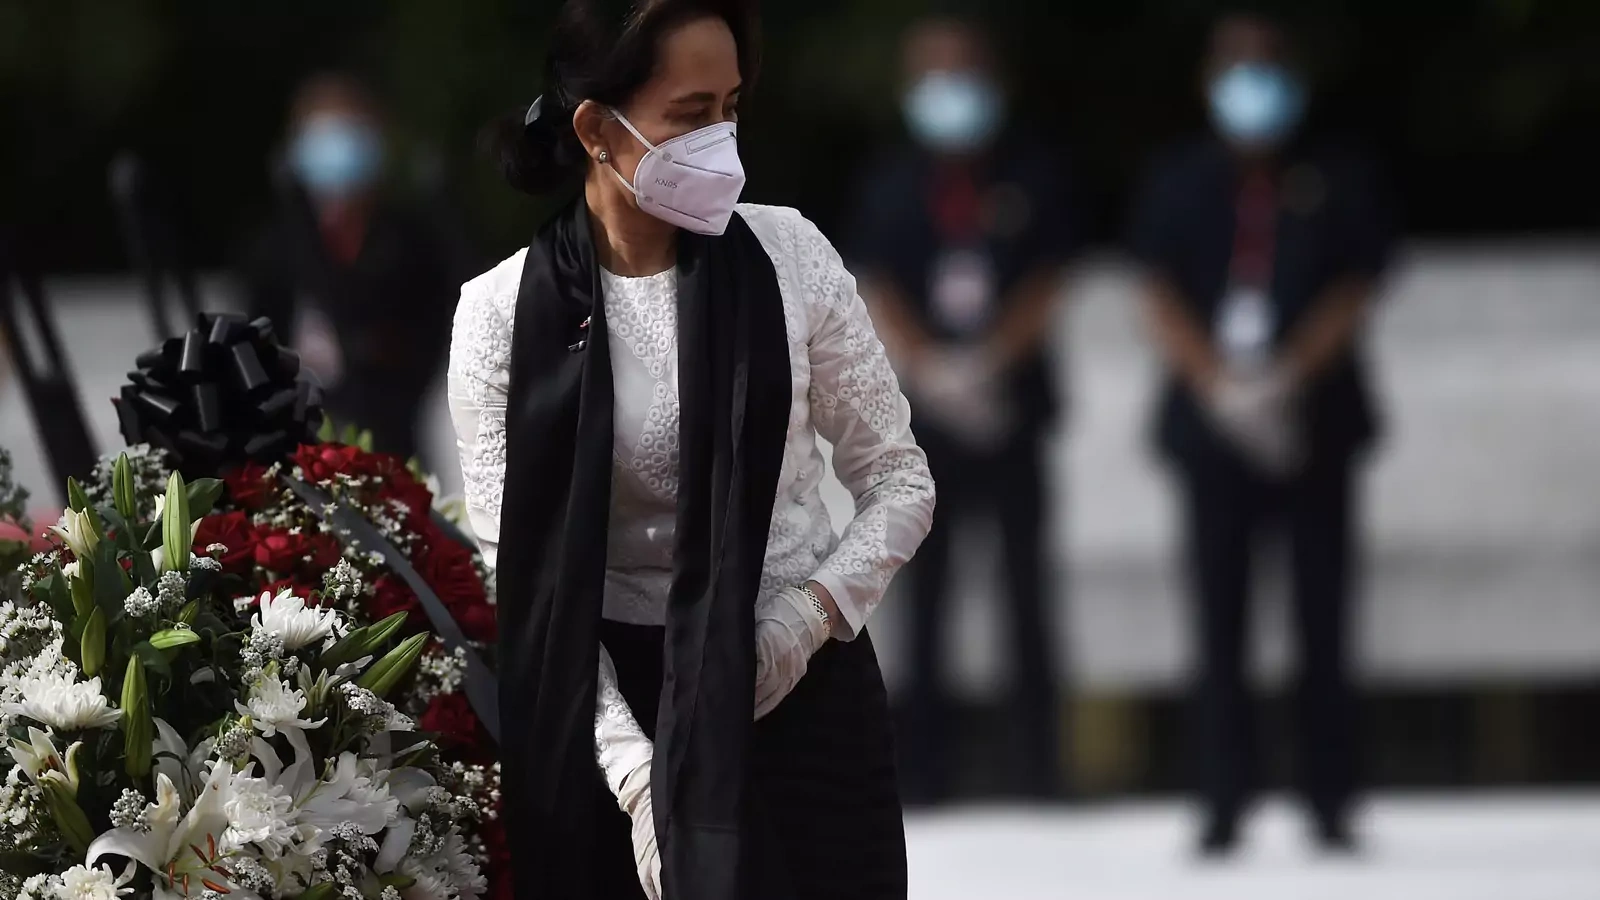 Myanmar State Counsellor and Foreign Minister Aung San Suu Kyi leaves after paying her respects to her late father during a ceremony to mark the 73rd anniversary of Martyrs' Day in Yangon on July 19, 2020.